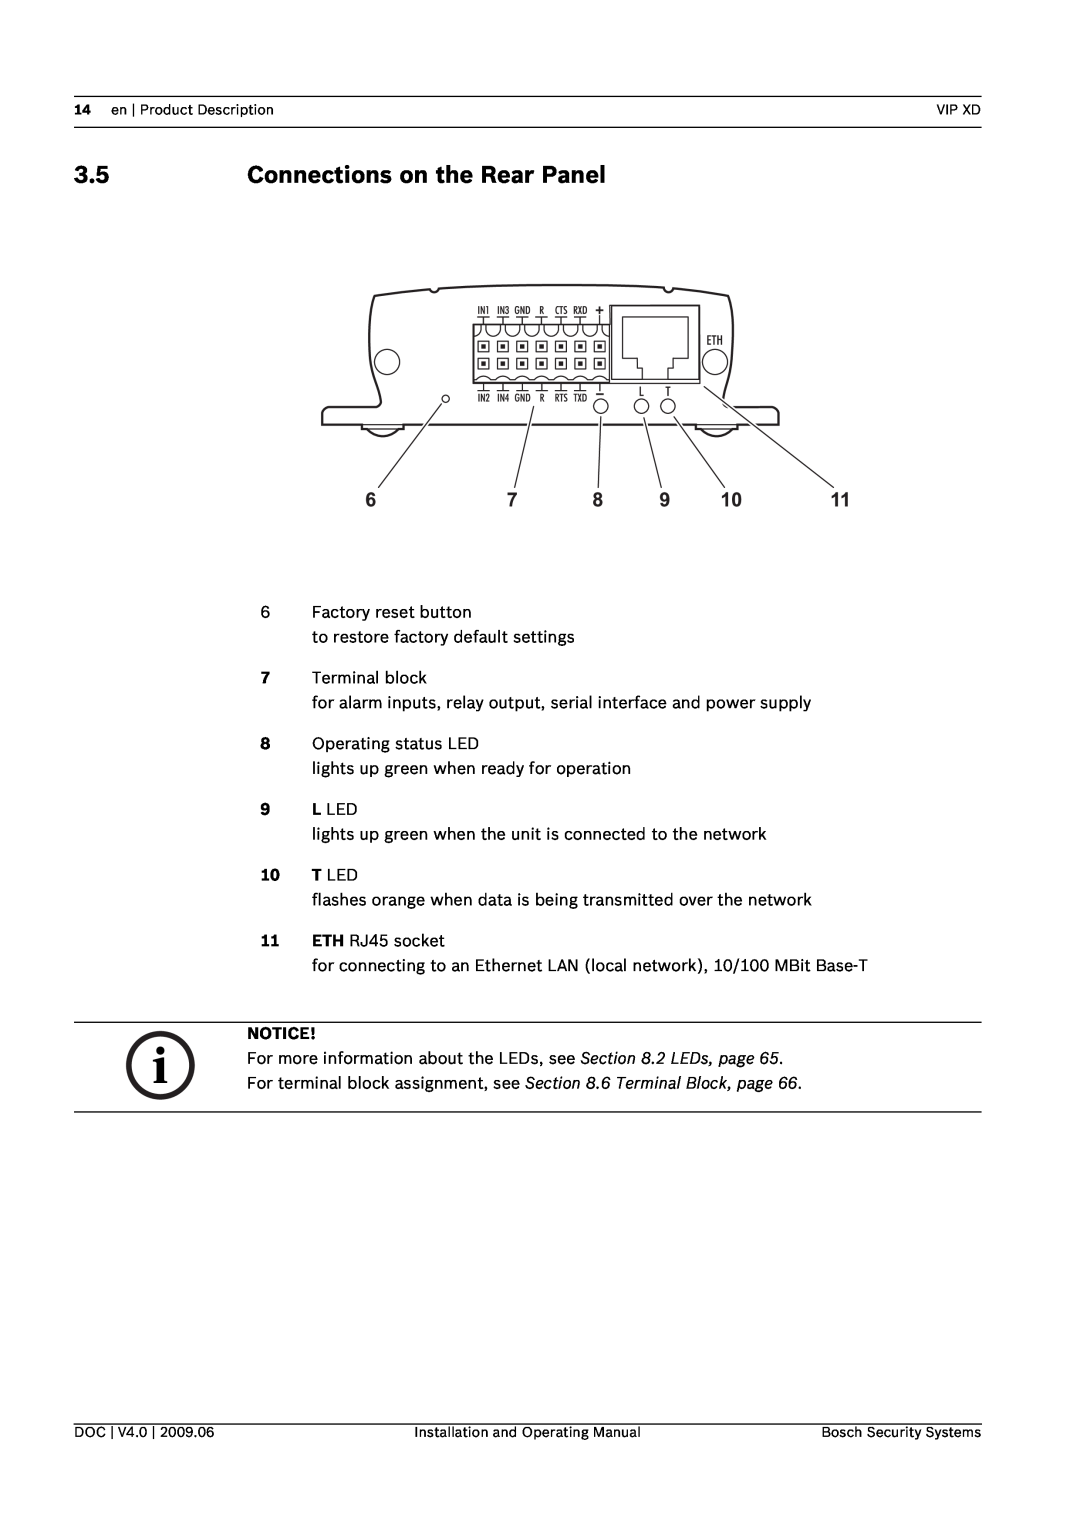 Bosch Appliances XD, VIP manual Connections on the Rear Panel 